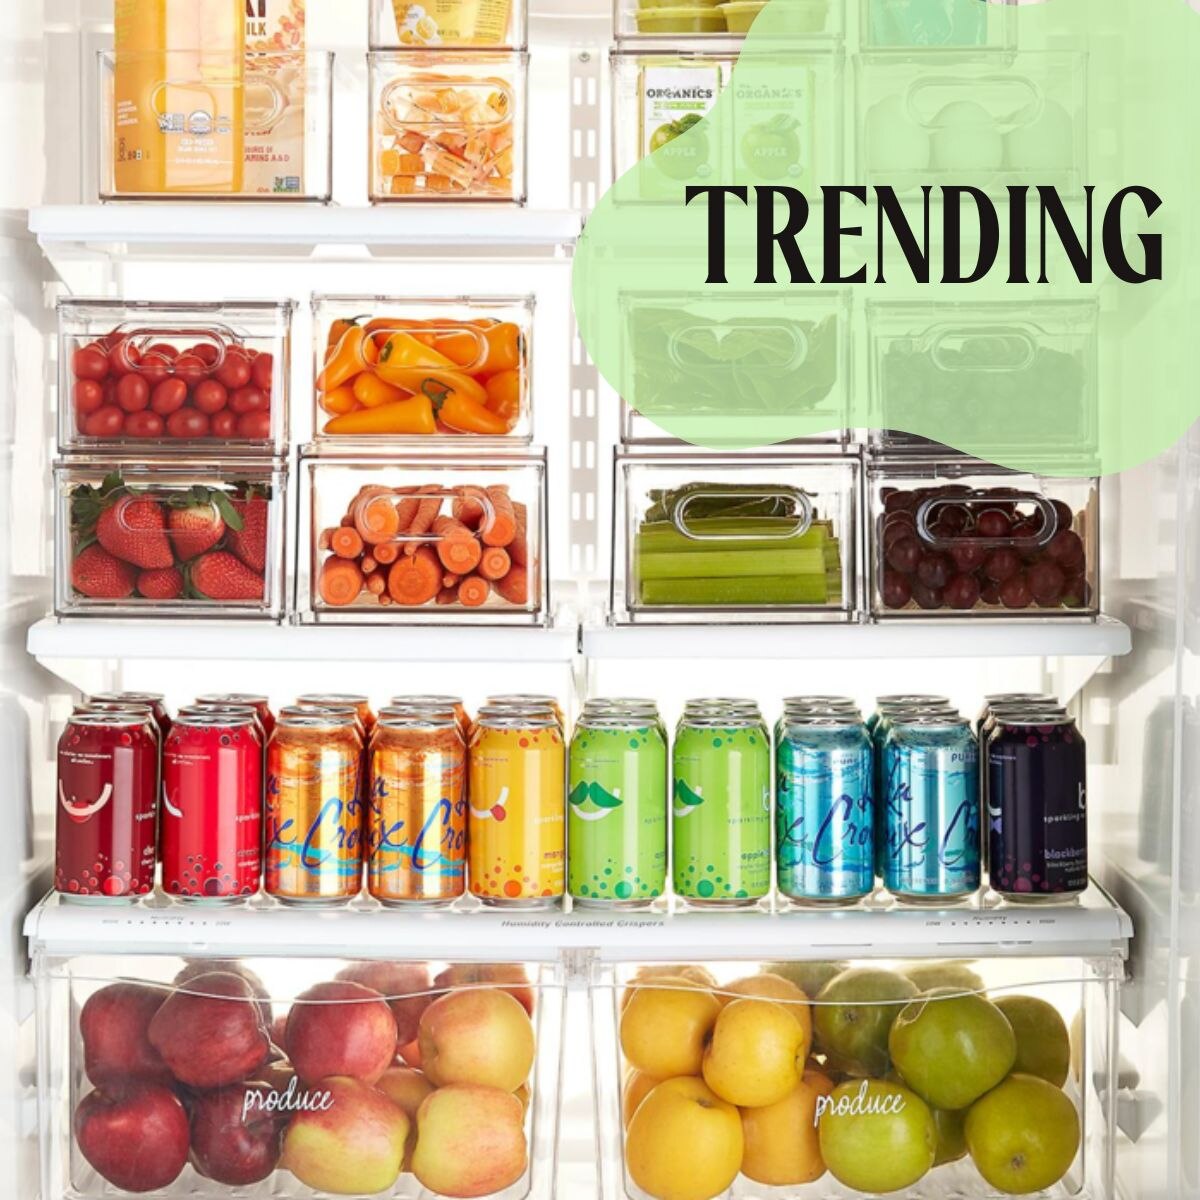 SHOP The Most Loved Container Store Items According to E! Readers thumb nail